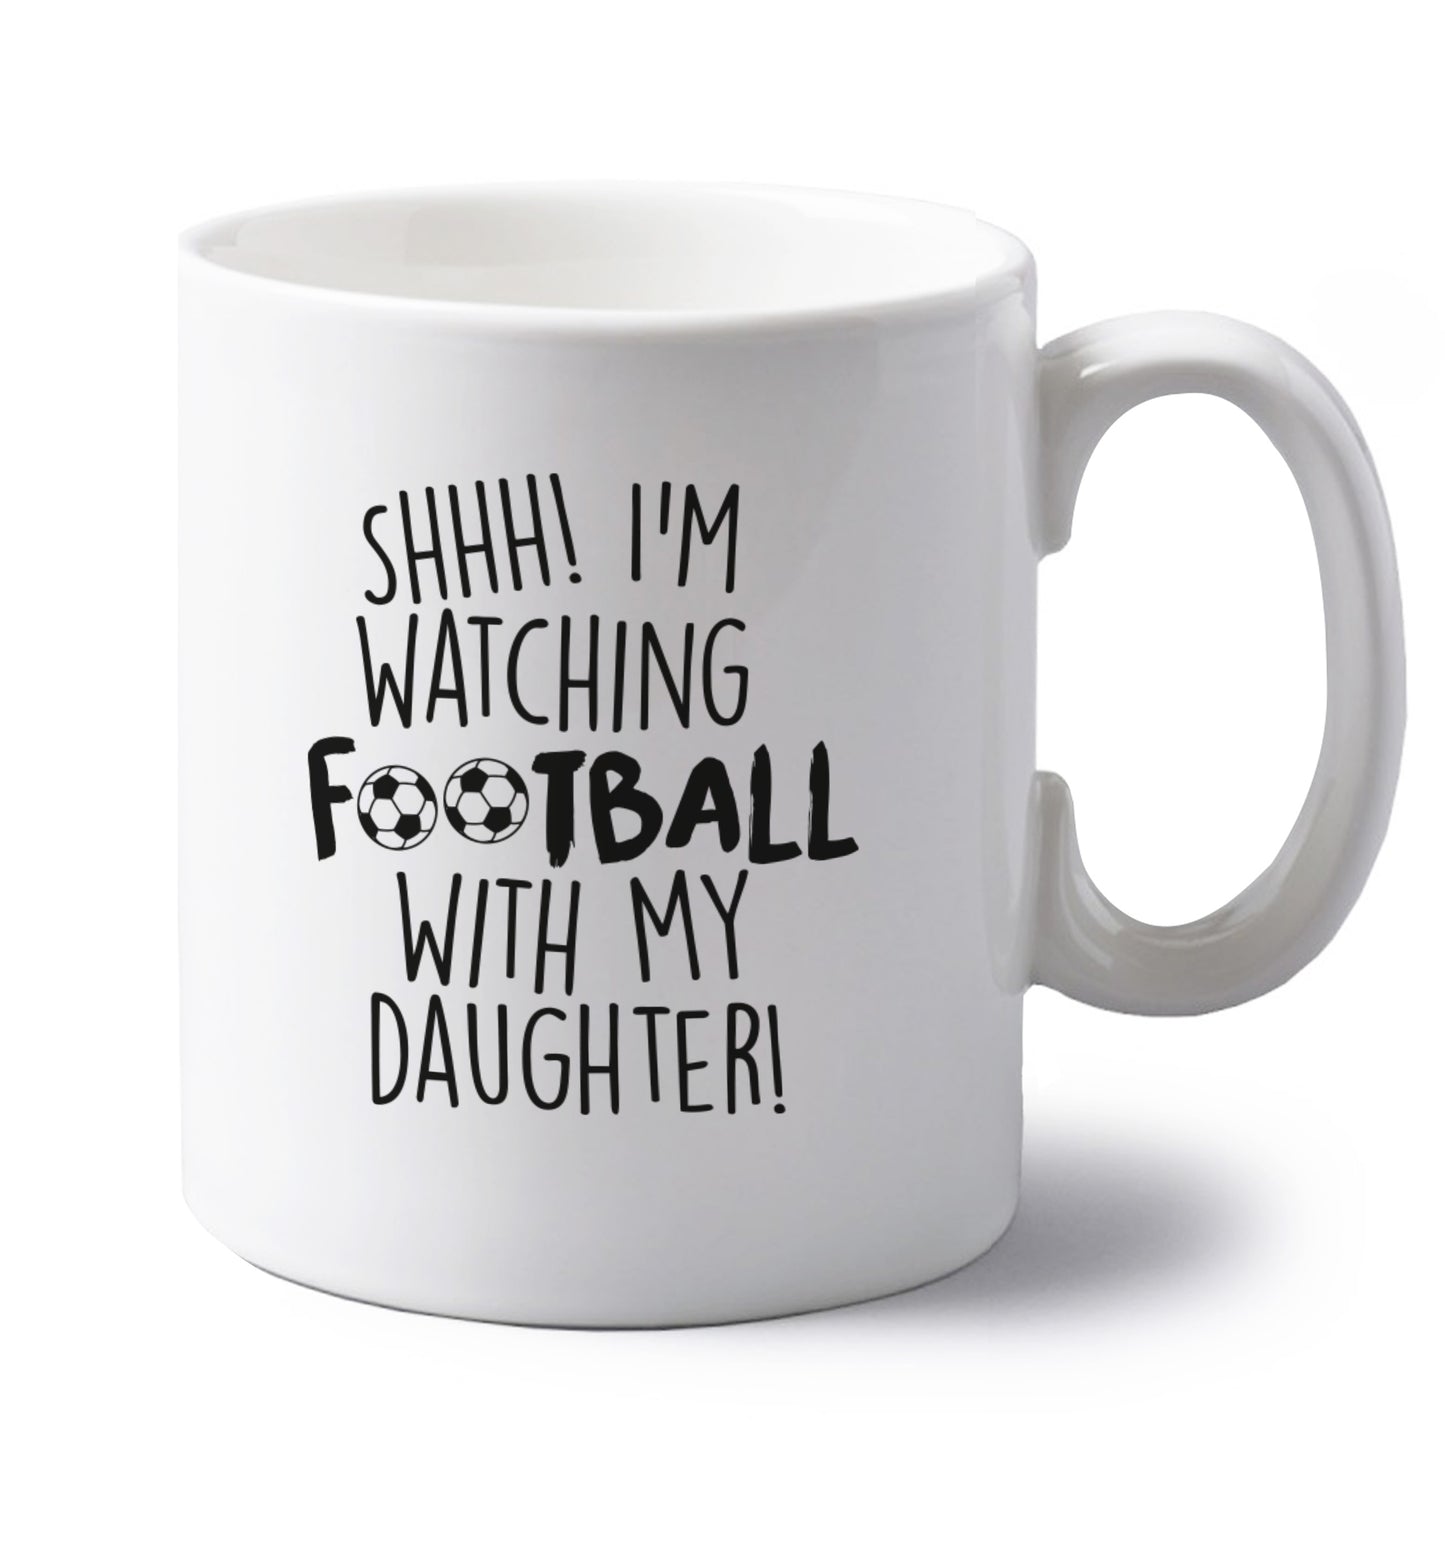 Shhh I'm watching football with my daughter left handed white ceramic mug 